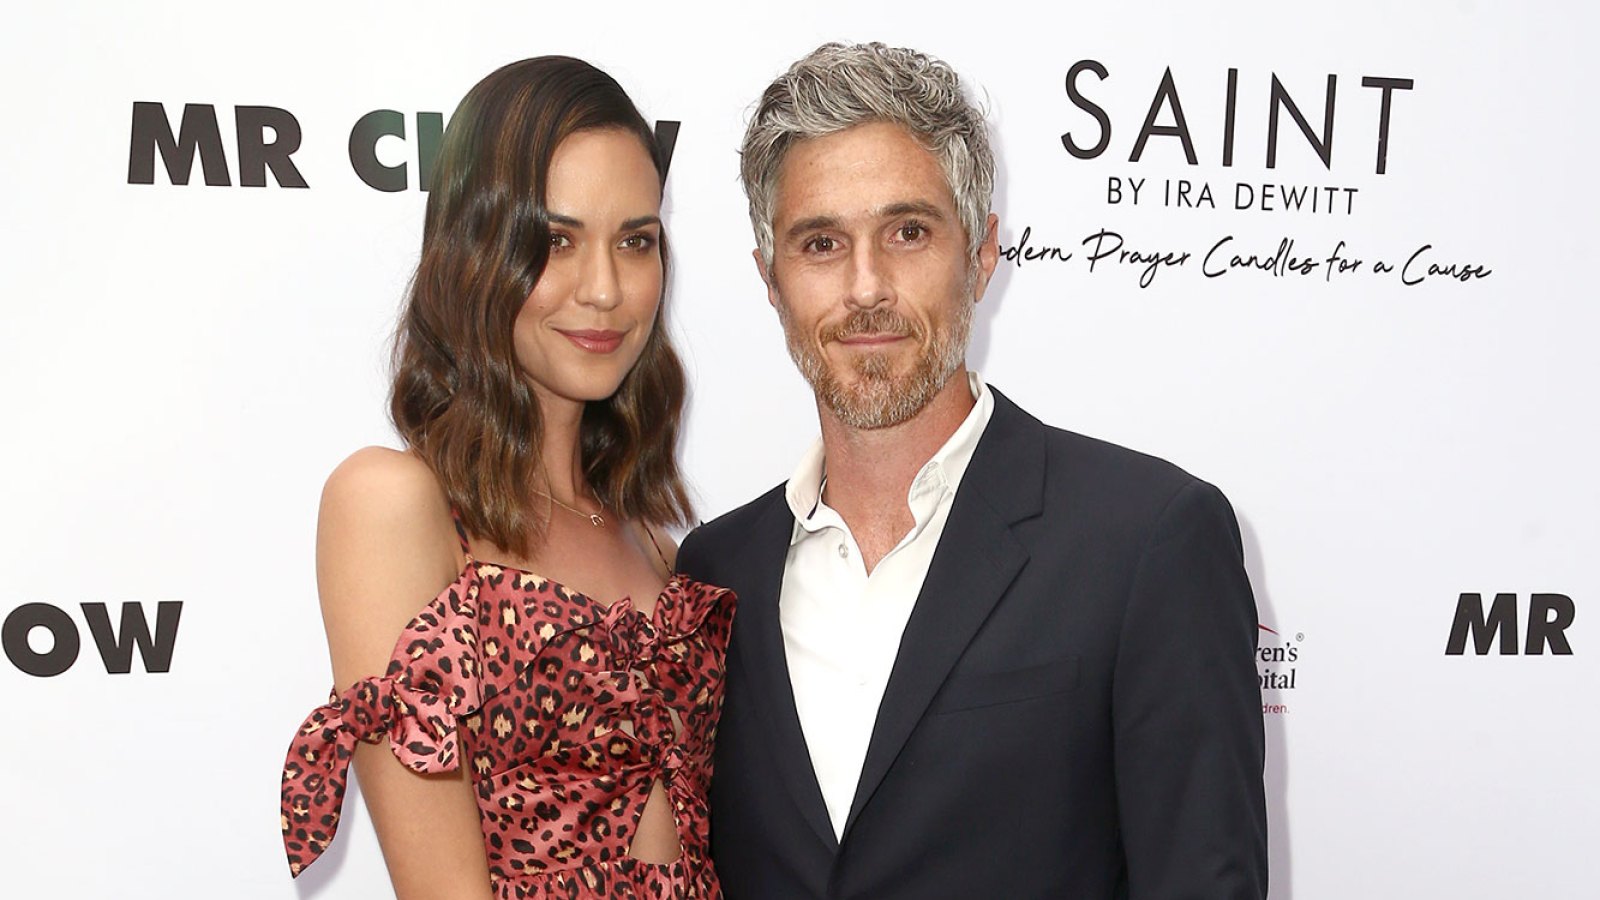 Odette Annable Wearing a Black Skirt and Multi Color Topa nd Dave Annable With White Shirt and Suit